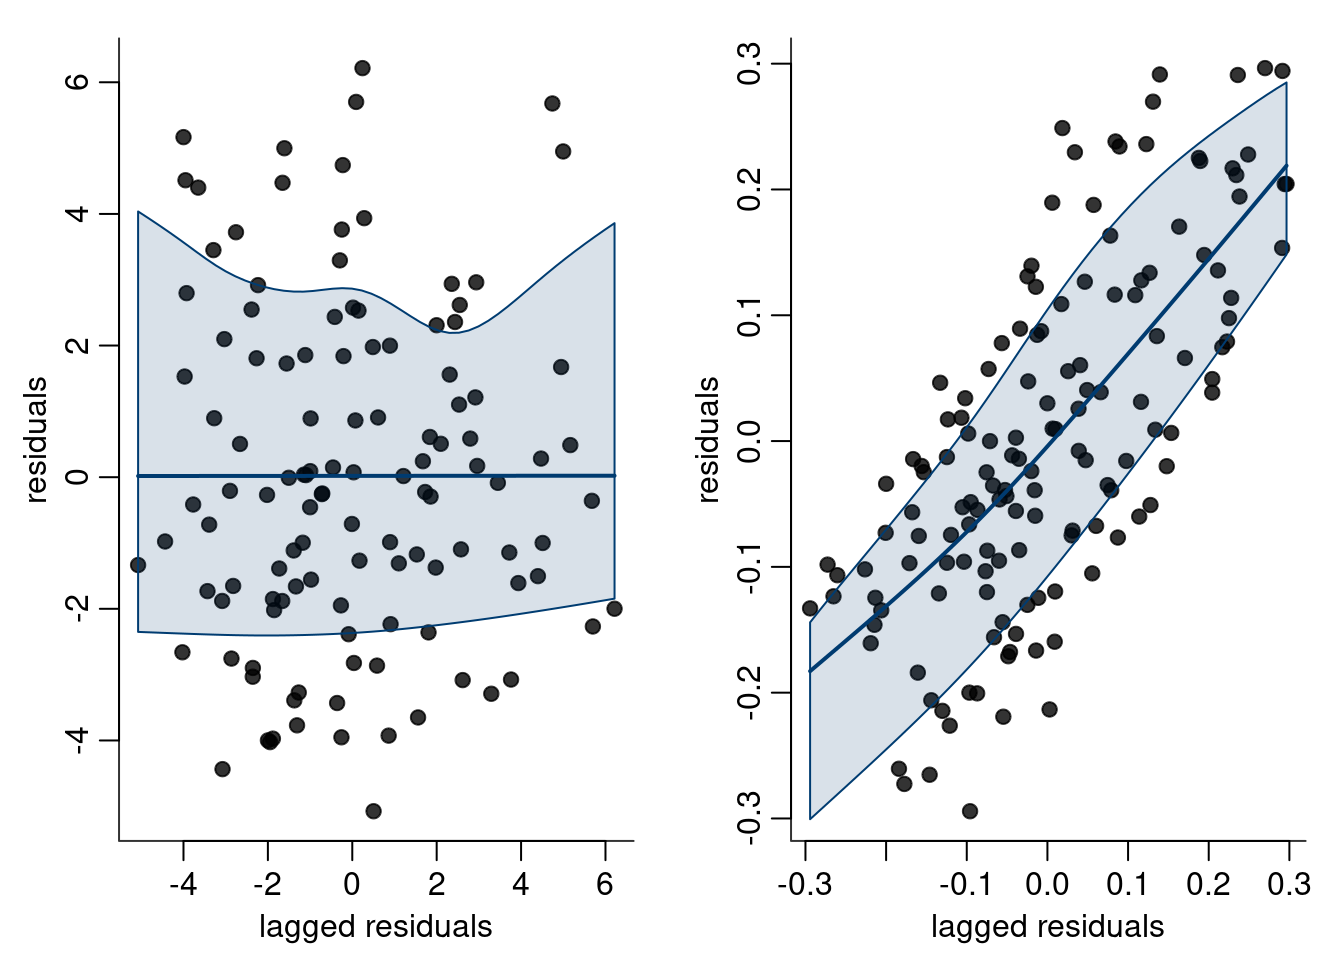 Lagged residual plots: there is no evidence against independence in the left panel, whereas the right panel shows positively correlated residuals.